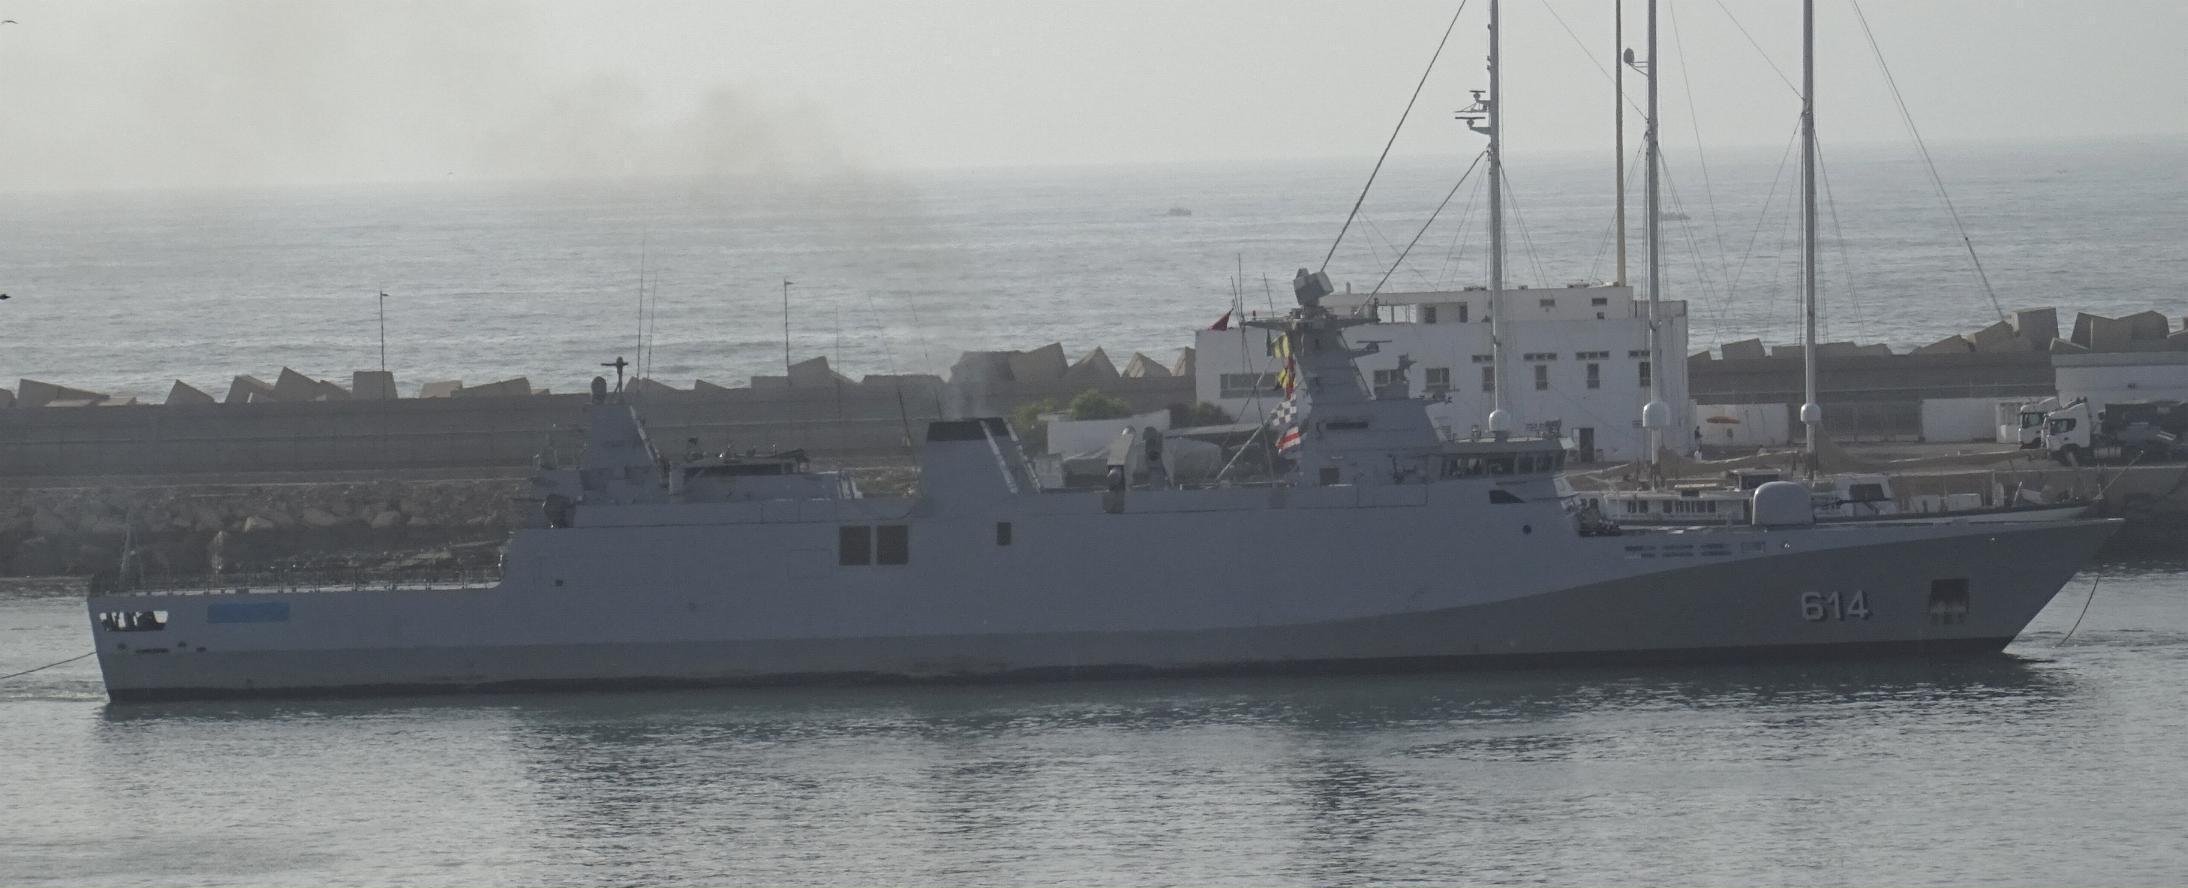 Royal Moroccan Navy Sigma class frigates / Frégates marocaines multimissions Sigma - Page 27 52257690750_0a5951b847_o_d